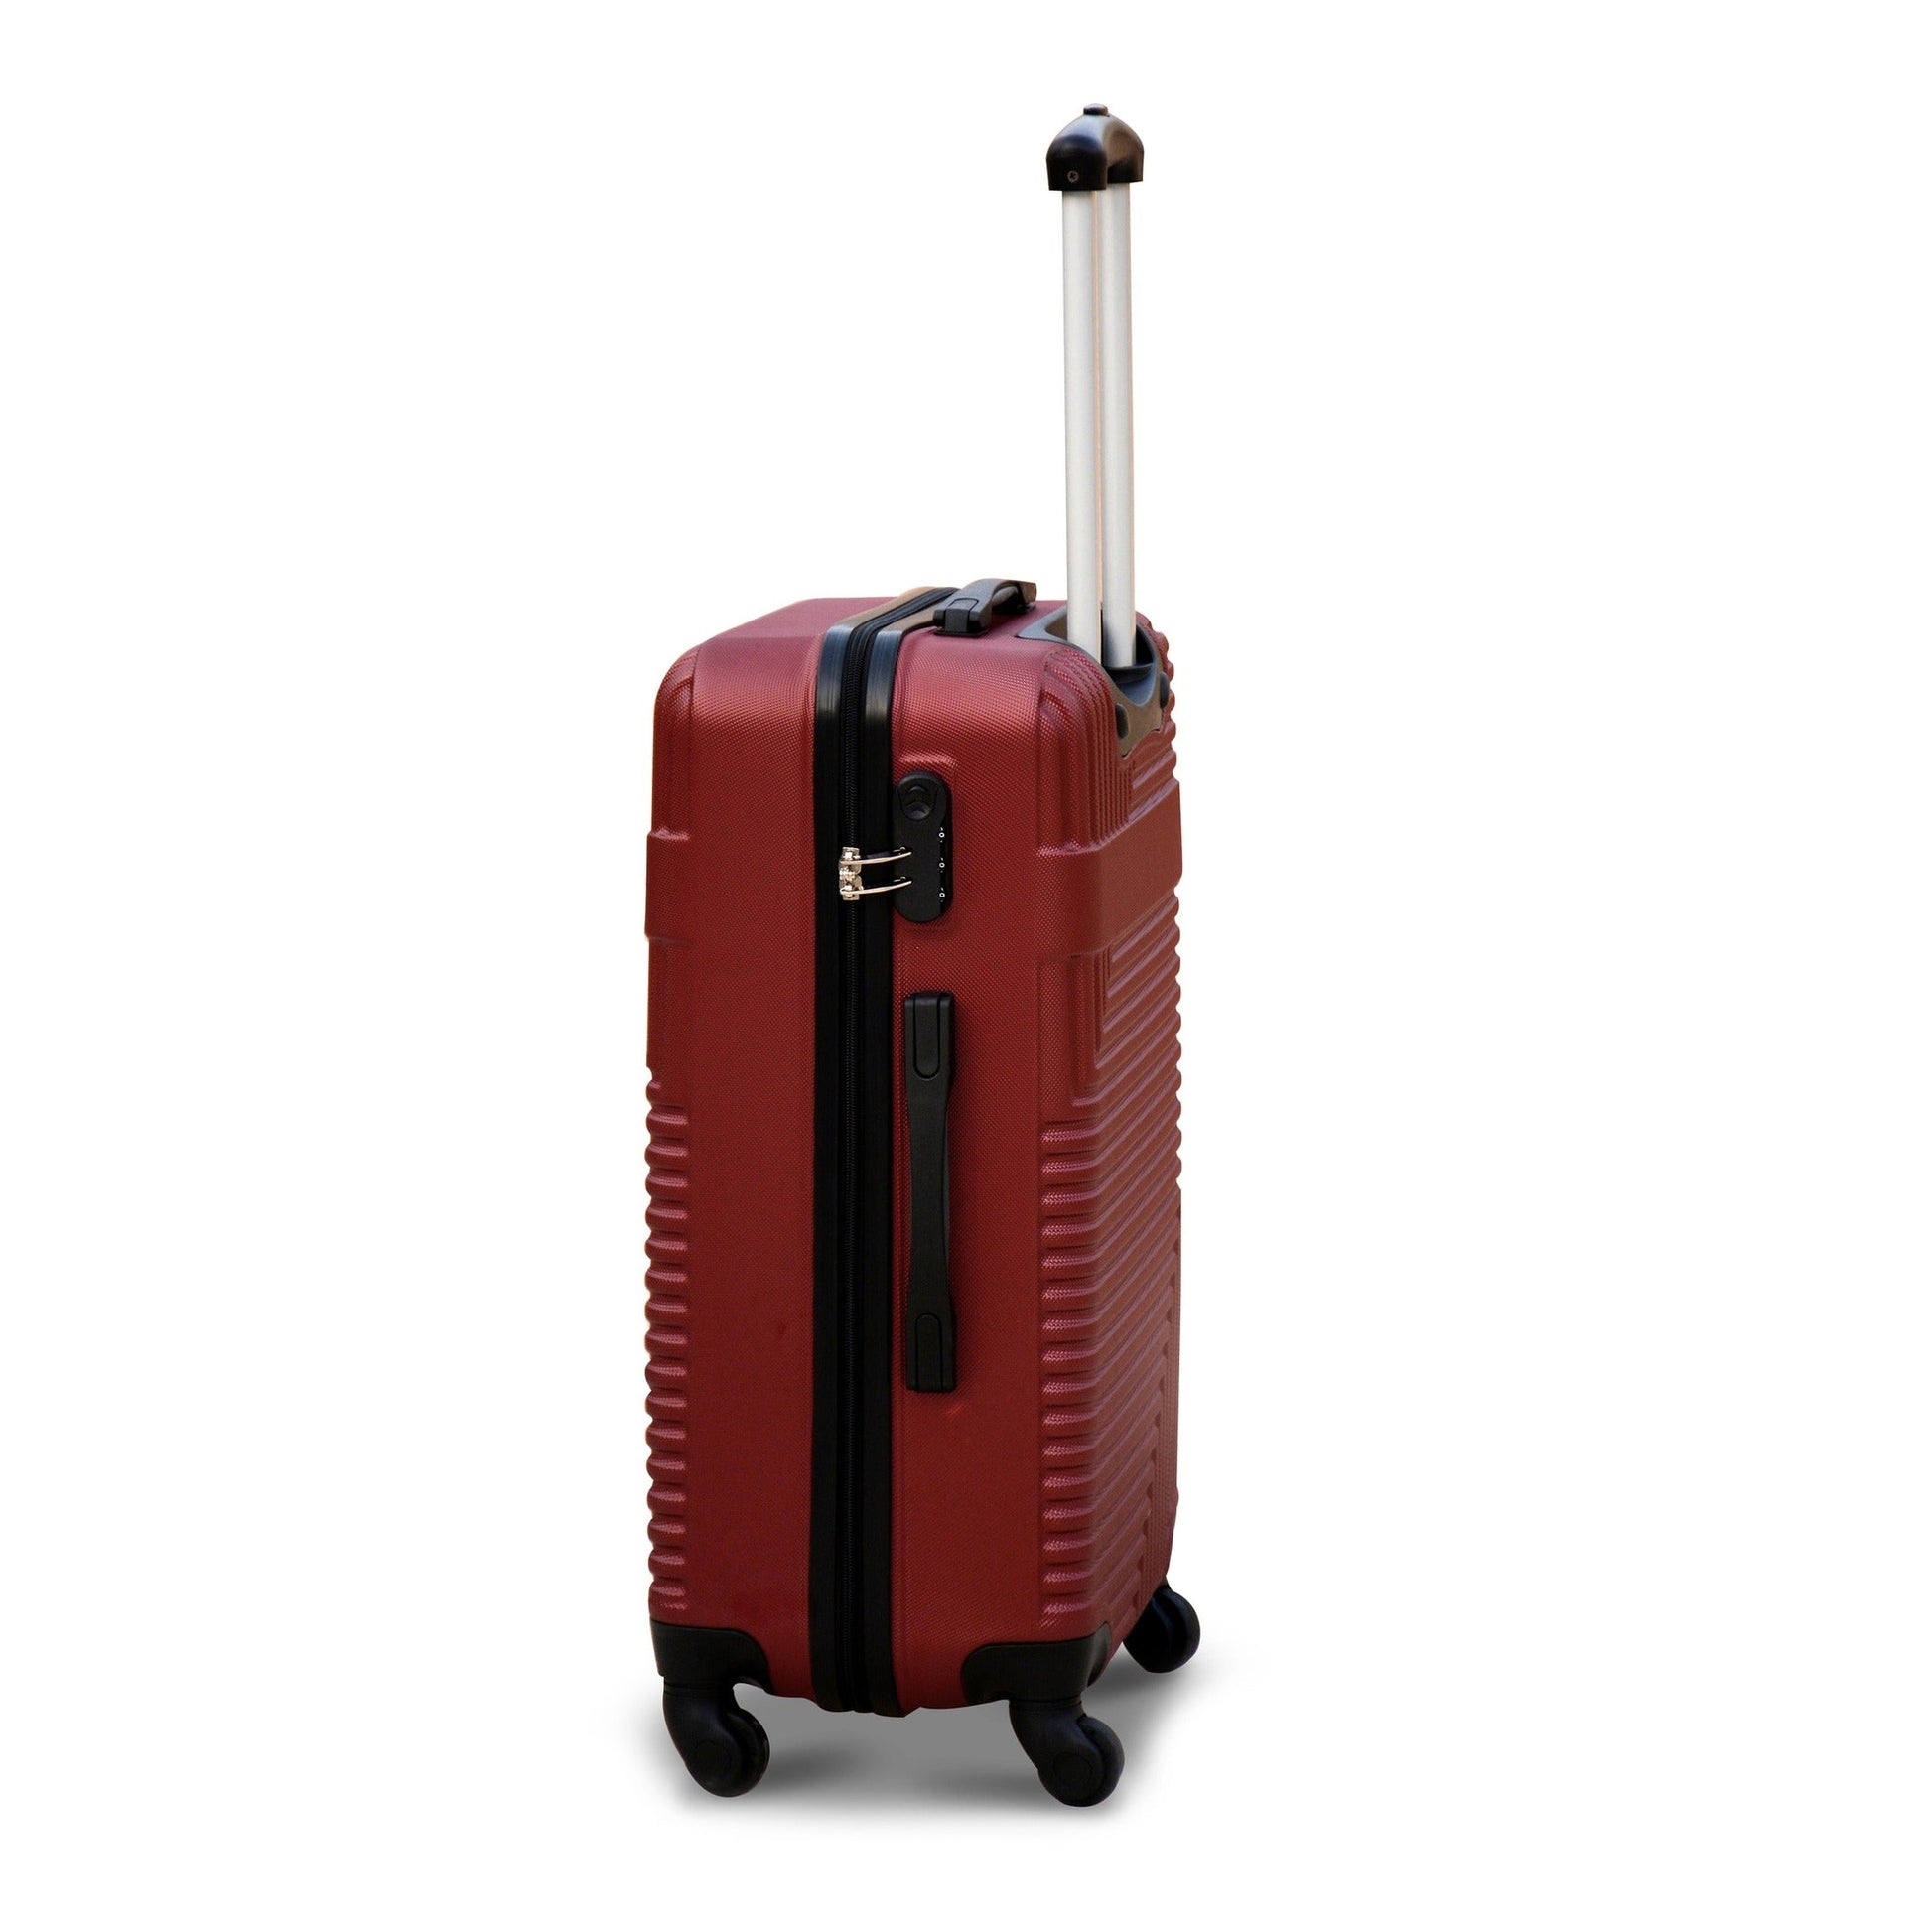 32" Red Colour Travel Way ABS Luggage Lightweight Hard Case Trolley Bag Zaappy.com